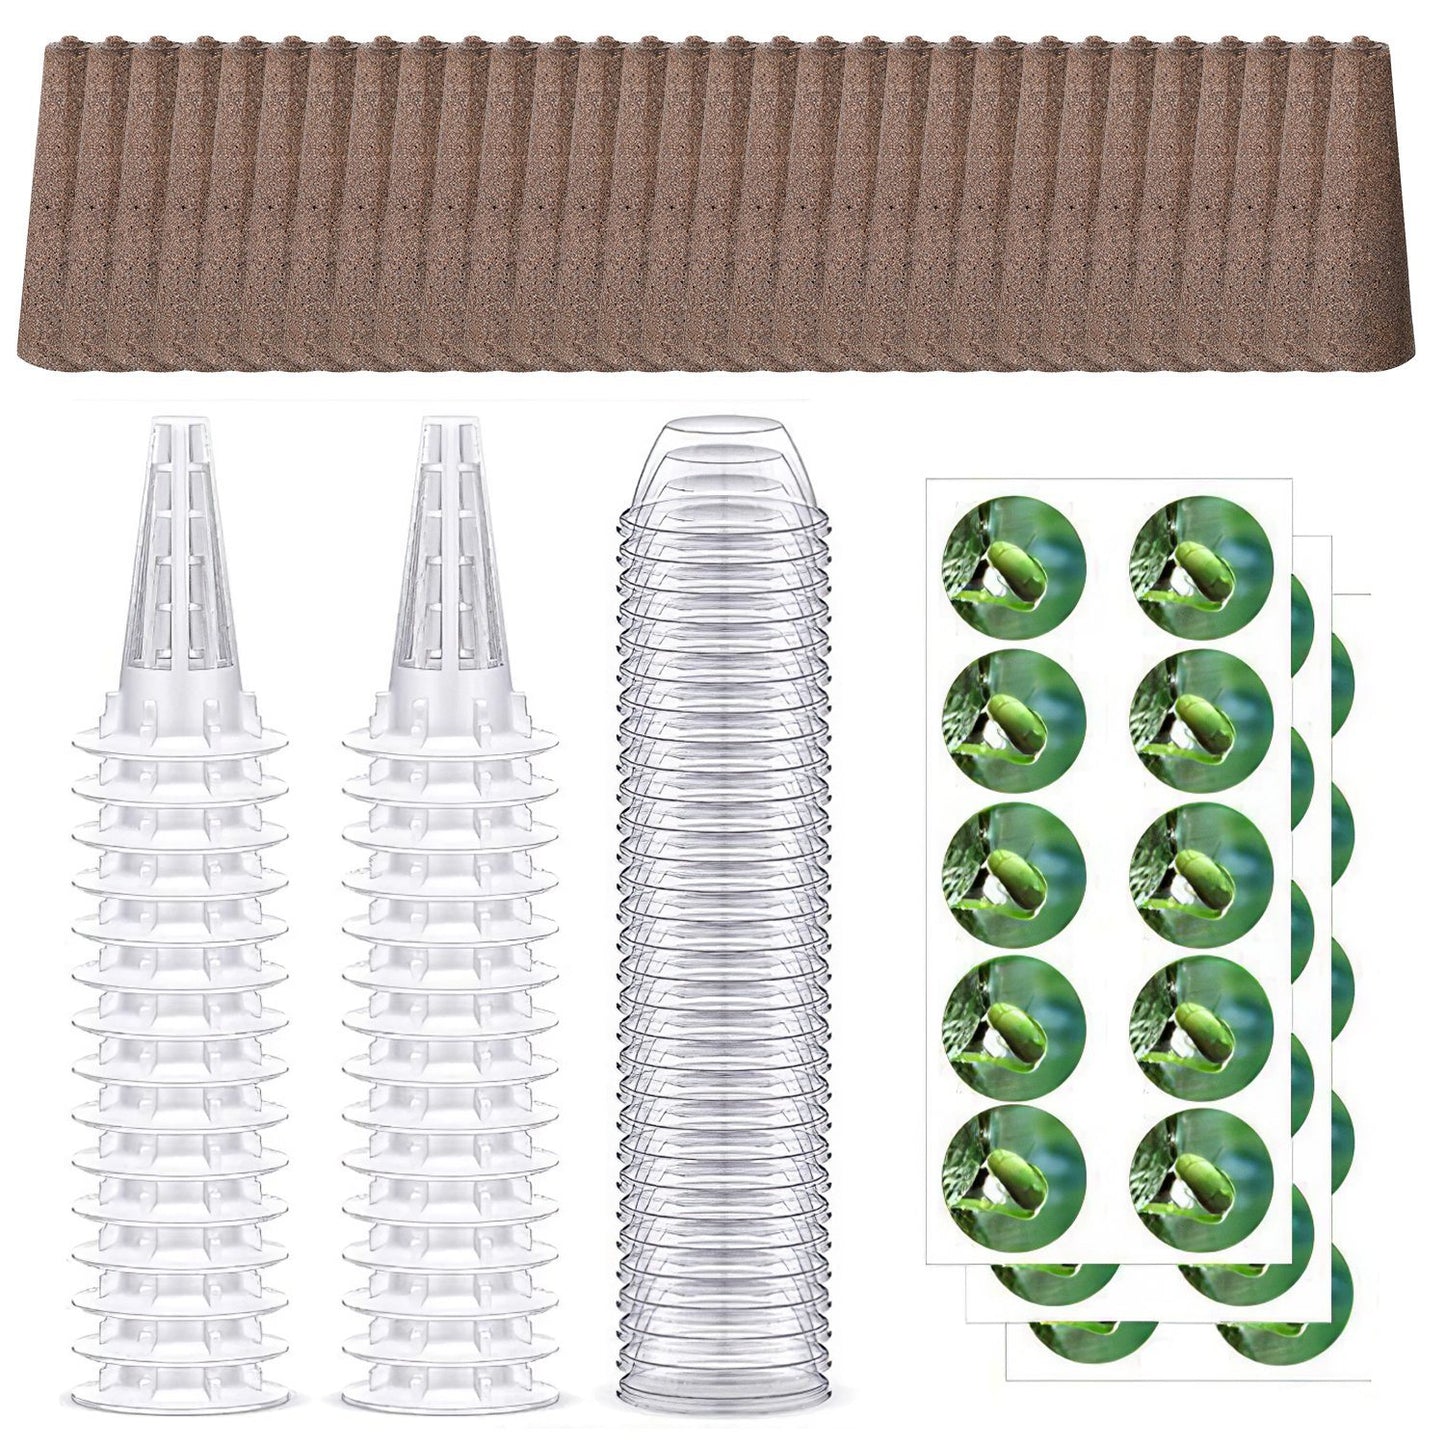 120Pcs Hydroponic Seed Pod Kit - Grow Anything Containers with Baskets, Lids, Sponges & Stickers